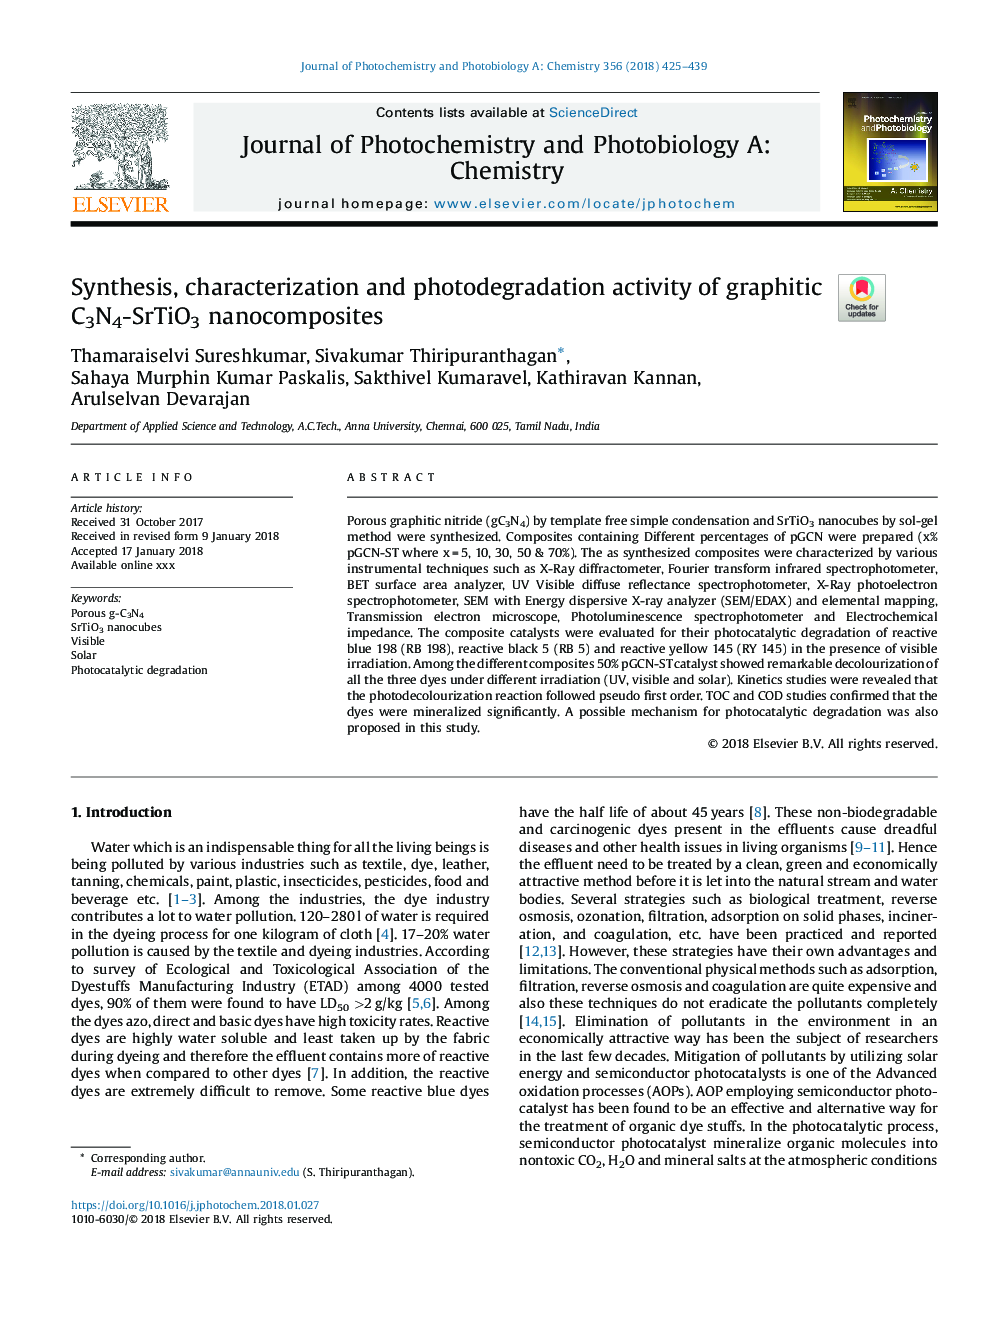 Synthesis, characterization and photodegradation activity of graphitic C3N4-SrTiO3 nanocomposites